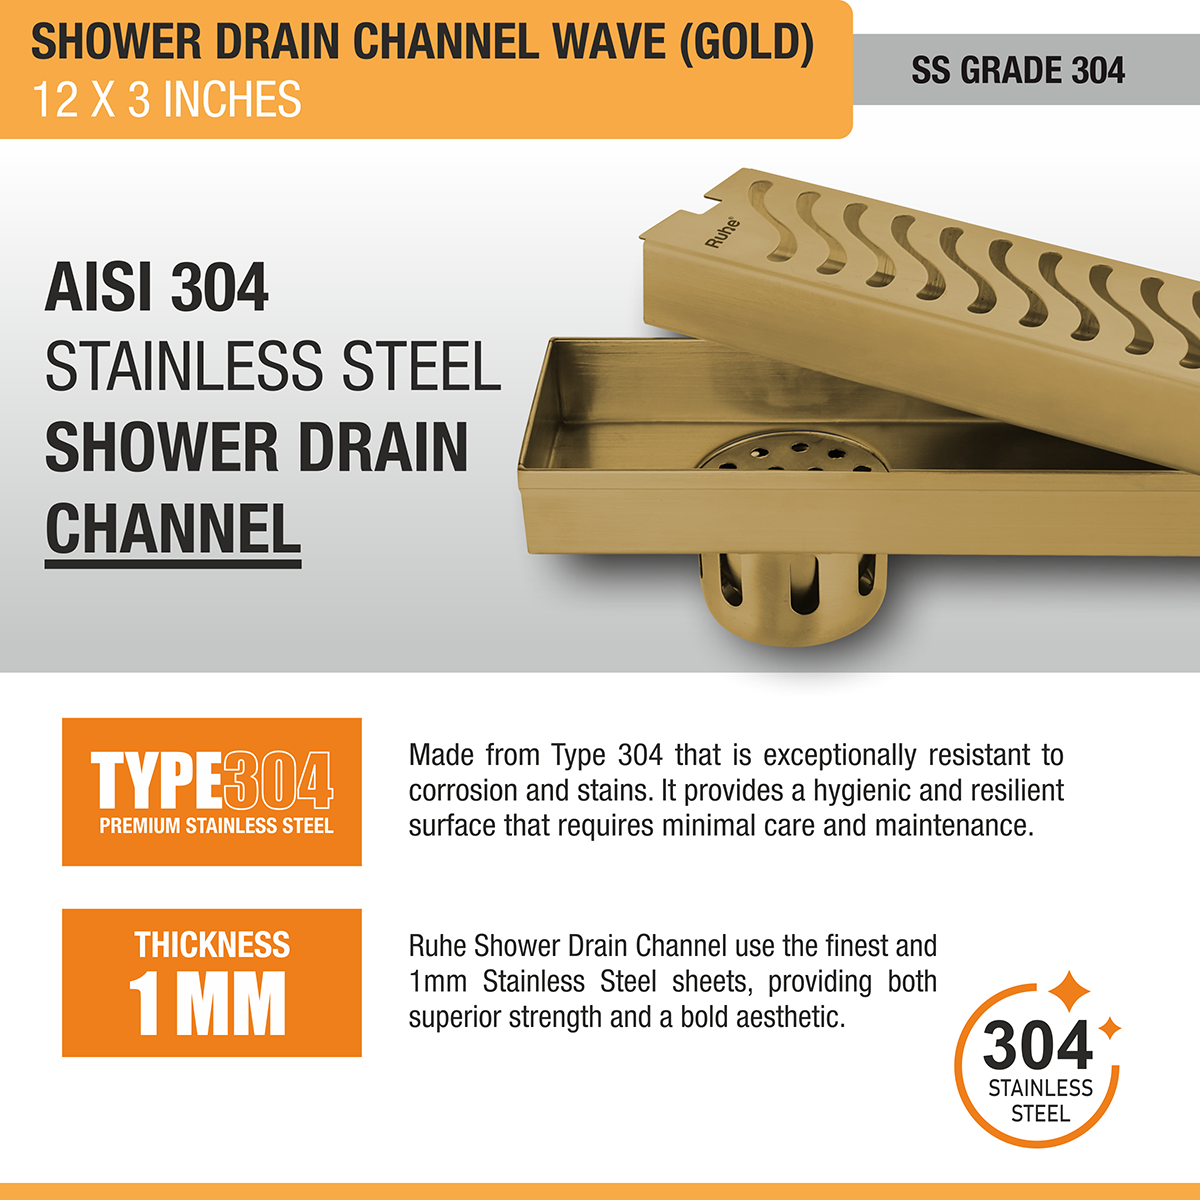 Wave Shower Drain Channel (12 x 3 Inches) YELLOW GOLD stainless steel